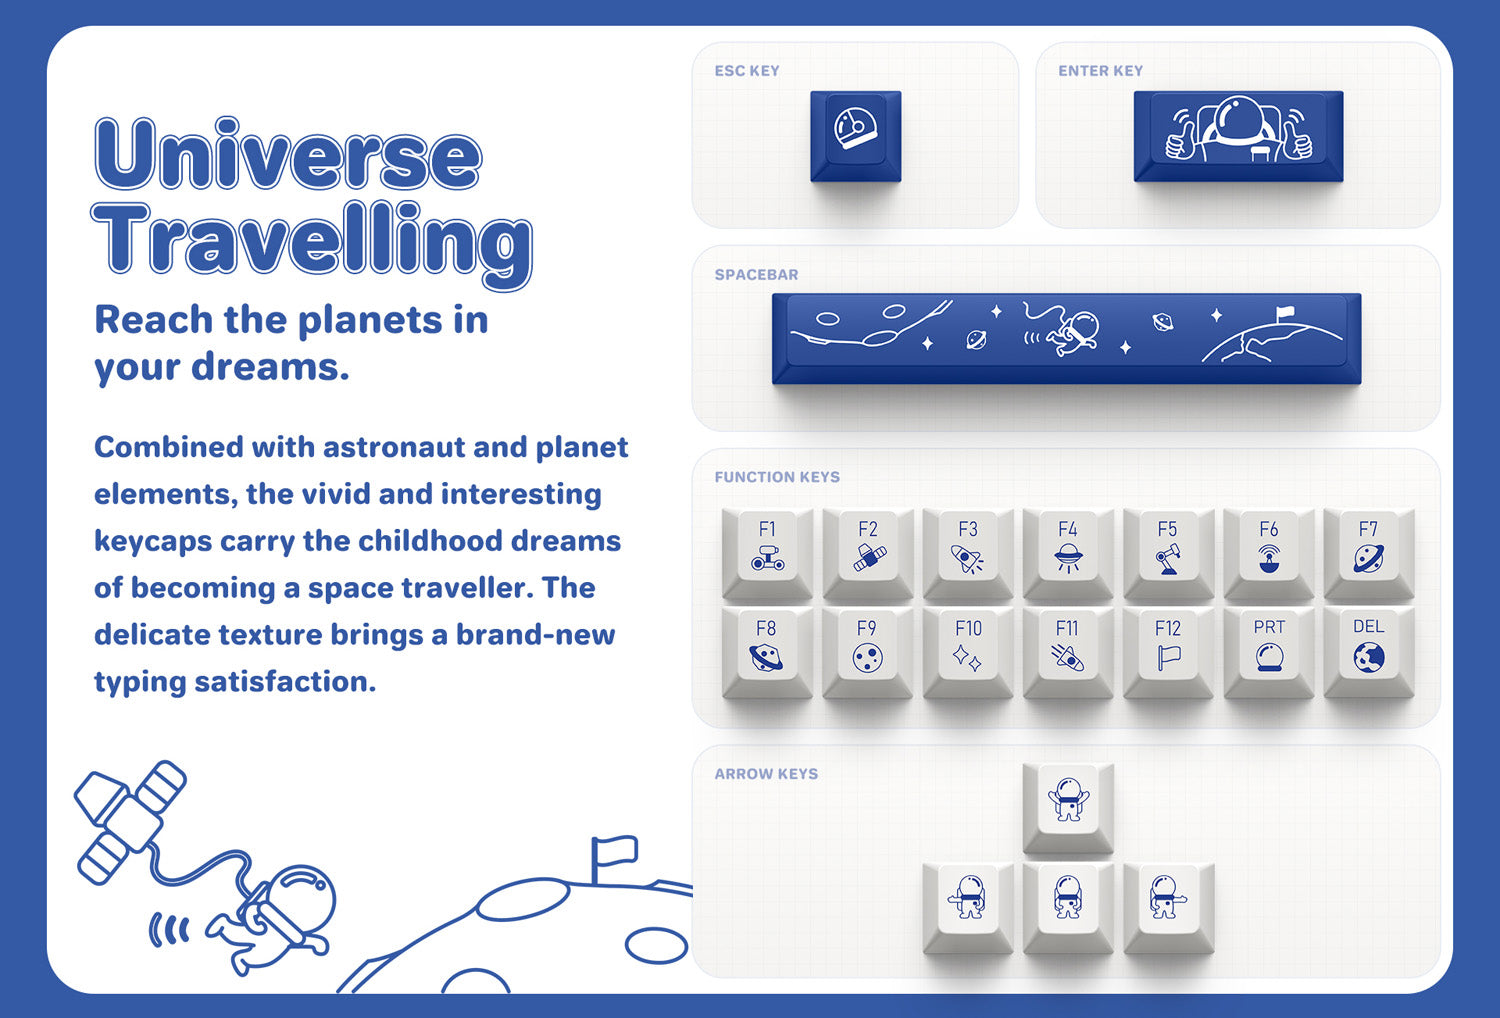 L80 SPACE THEMED Mechanical Keyboard L80 Comis Traveller